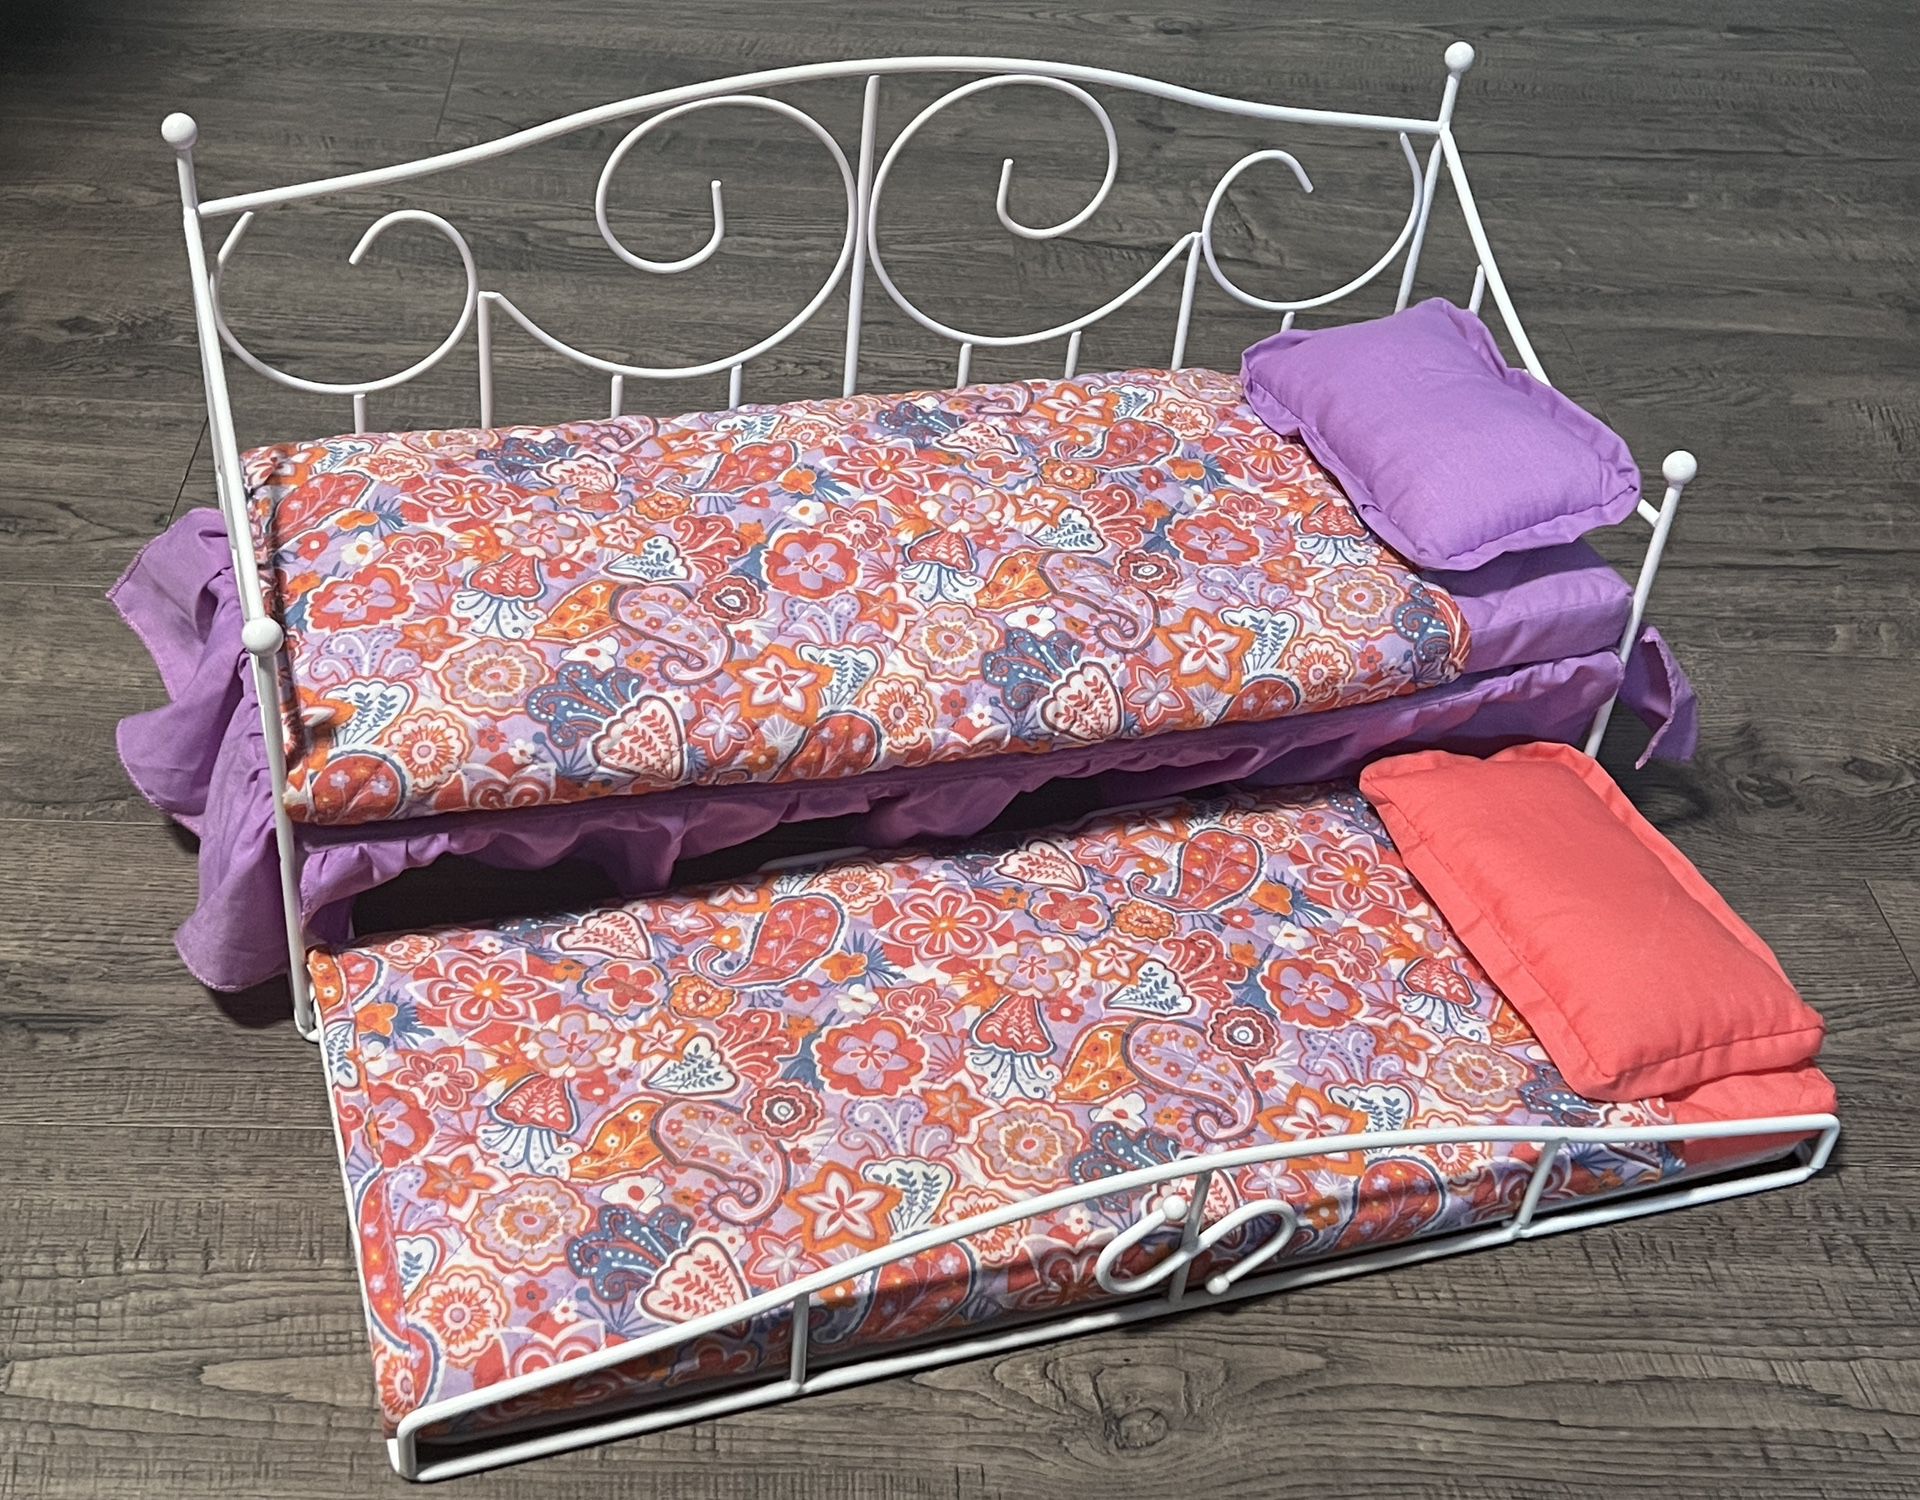 American Girl Style 18” Doll Size Beds 